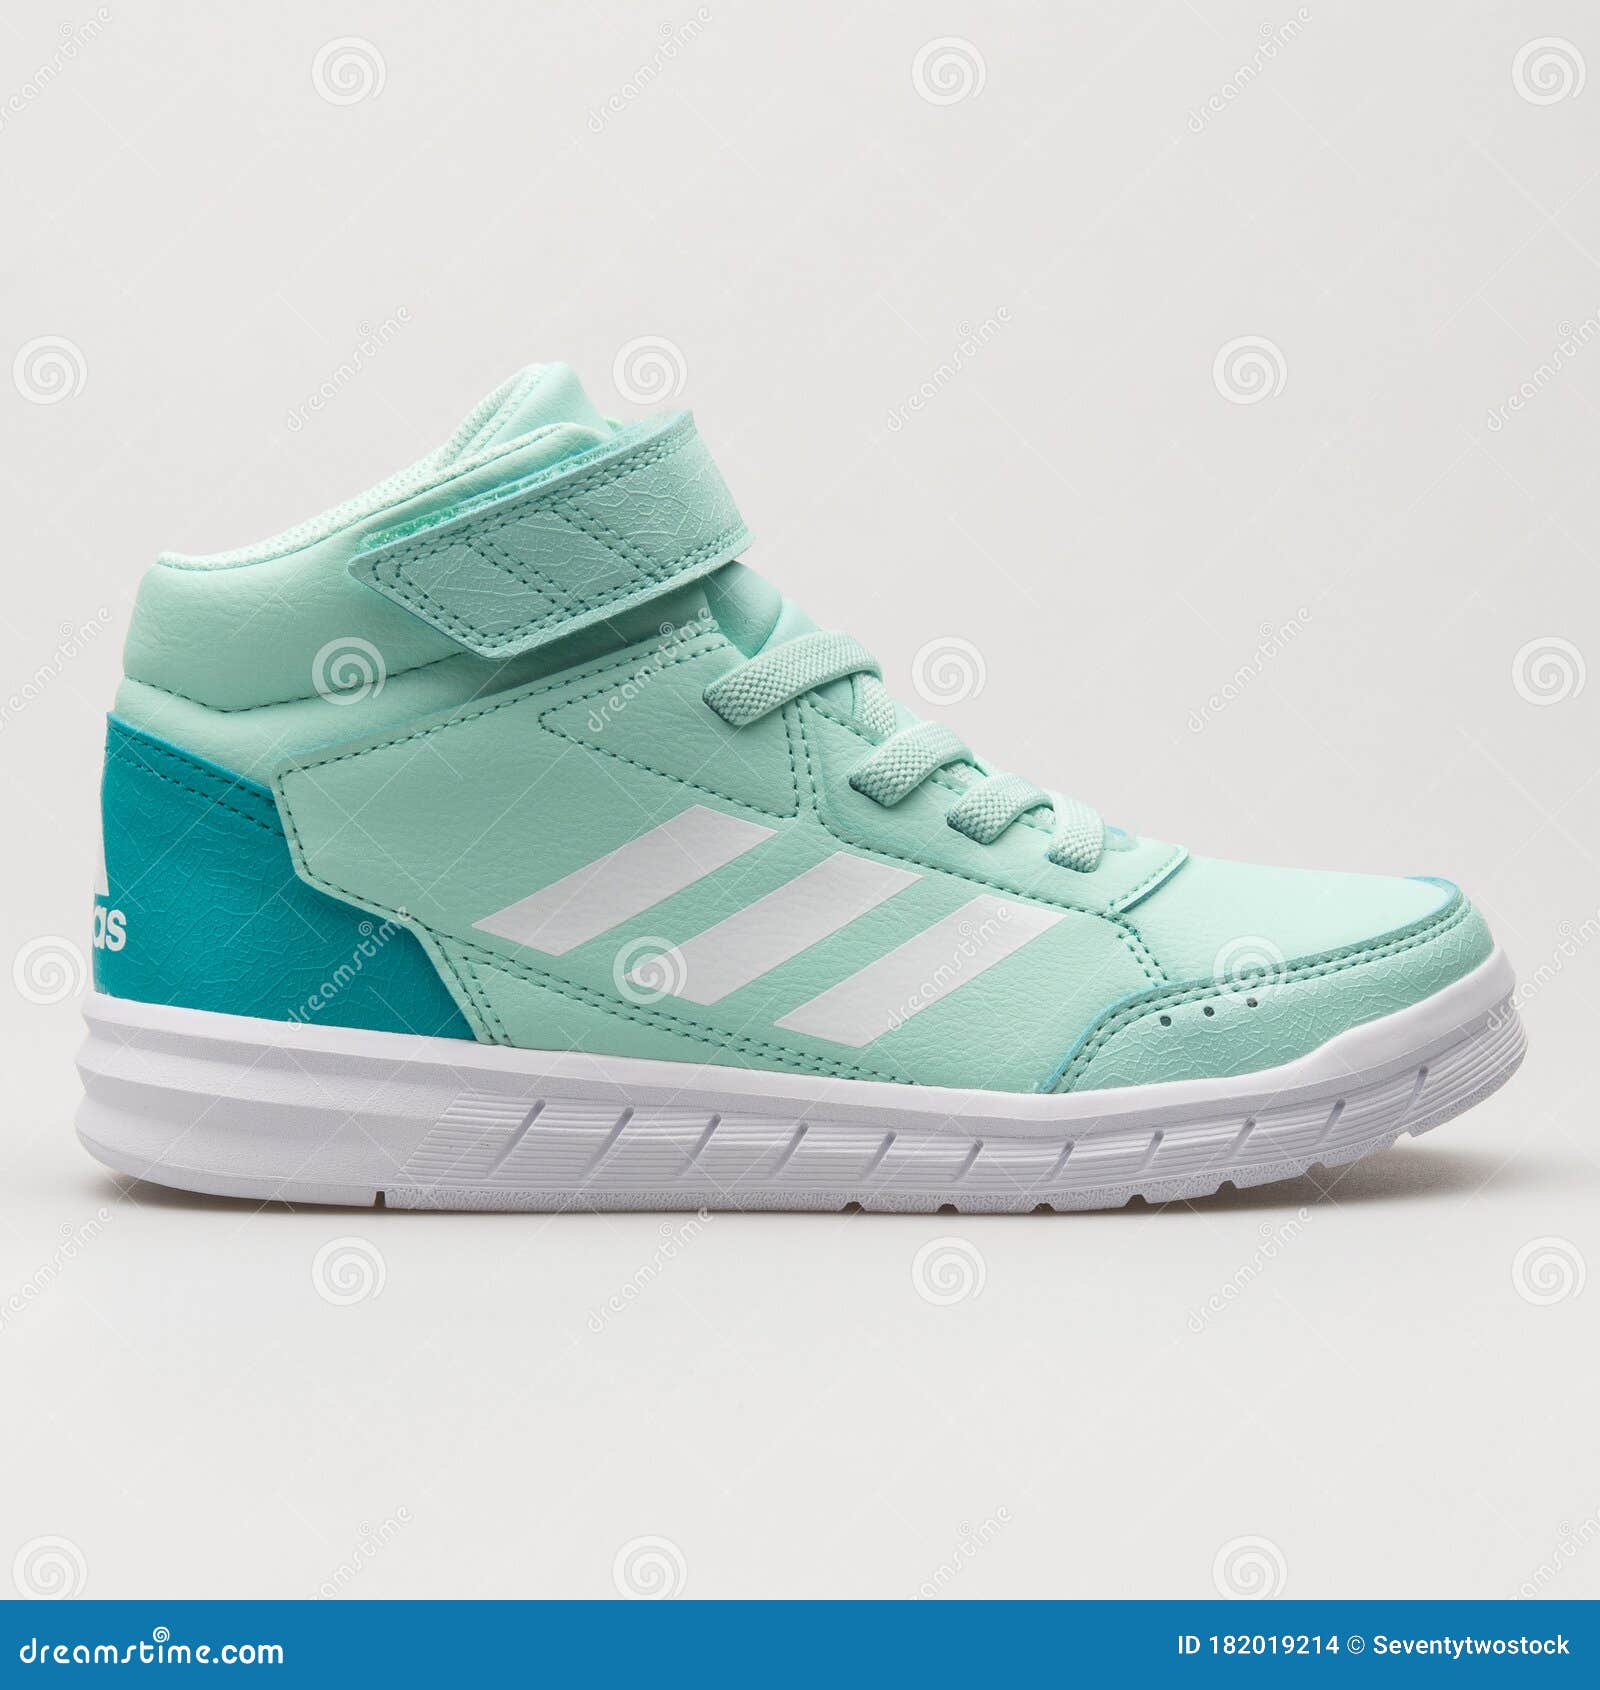 premium Imperative Silver Adidas AltaSport Mid EL Green and White Sneaker Editorial Stock Image -  Image of kids, side: 182019214